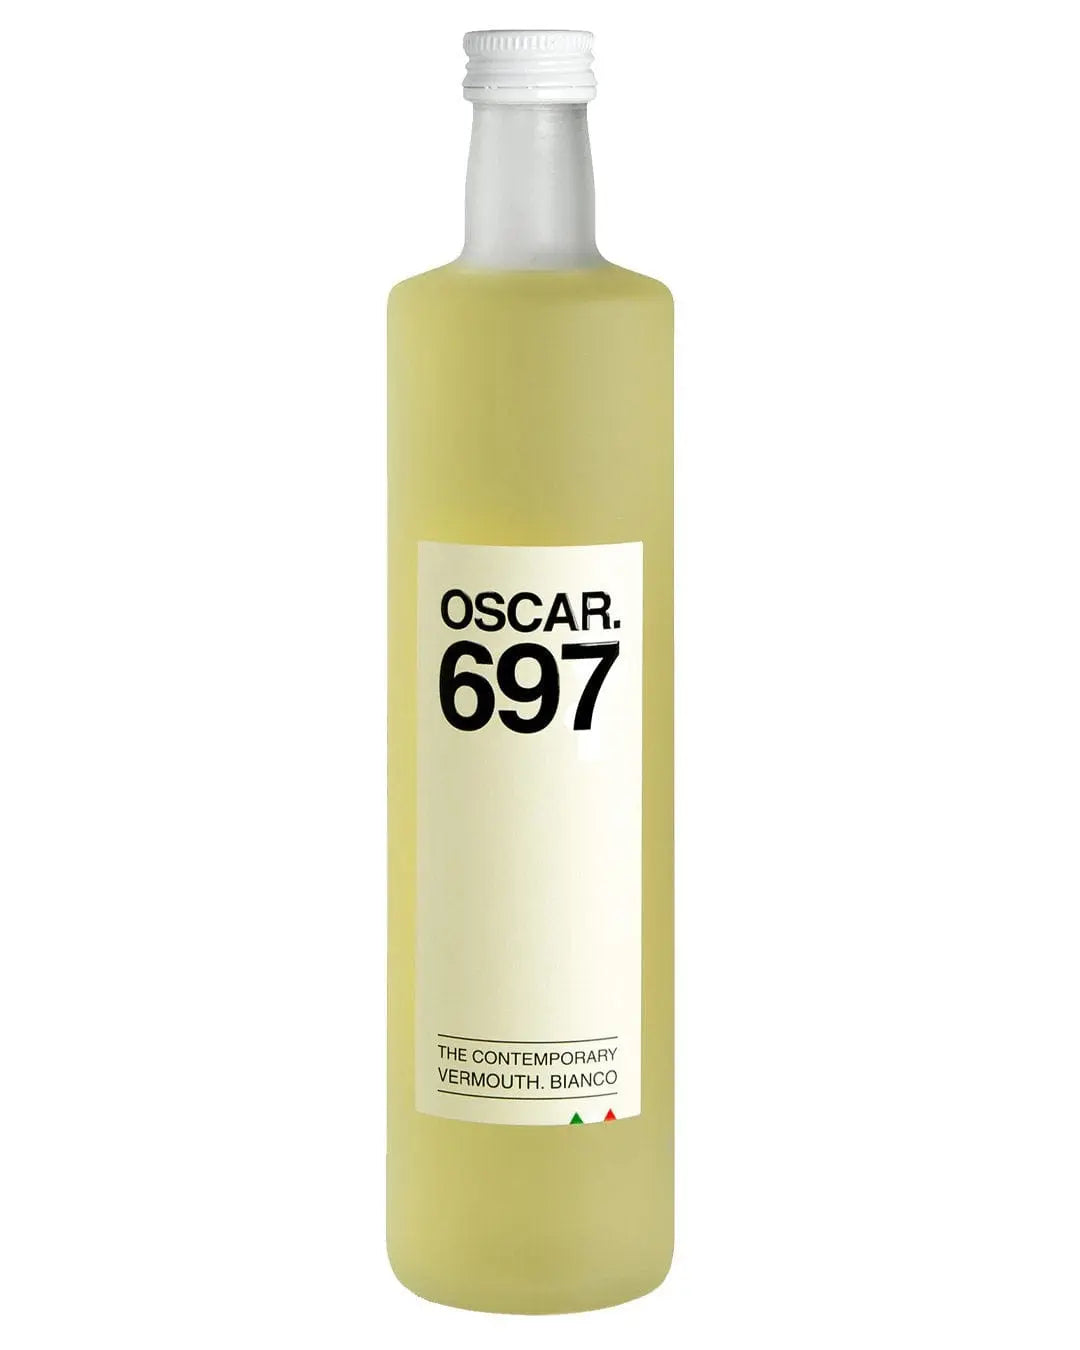 Oscar 697 Bianco Vermouth, 70 cl Fortified & Other Wines